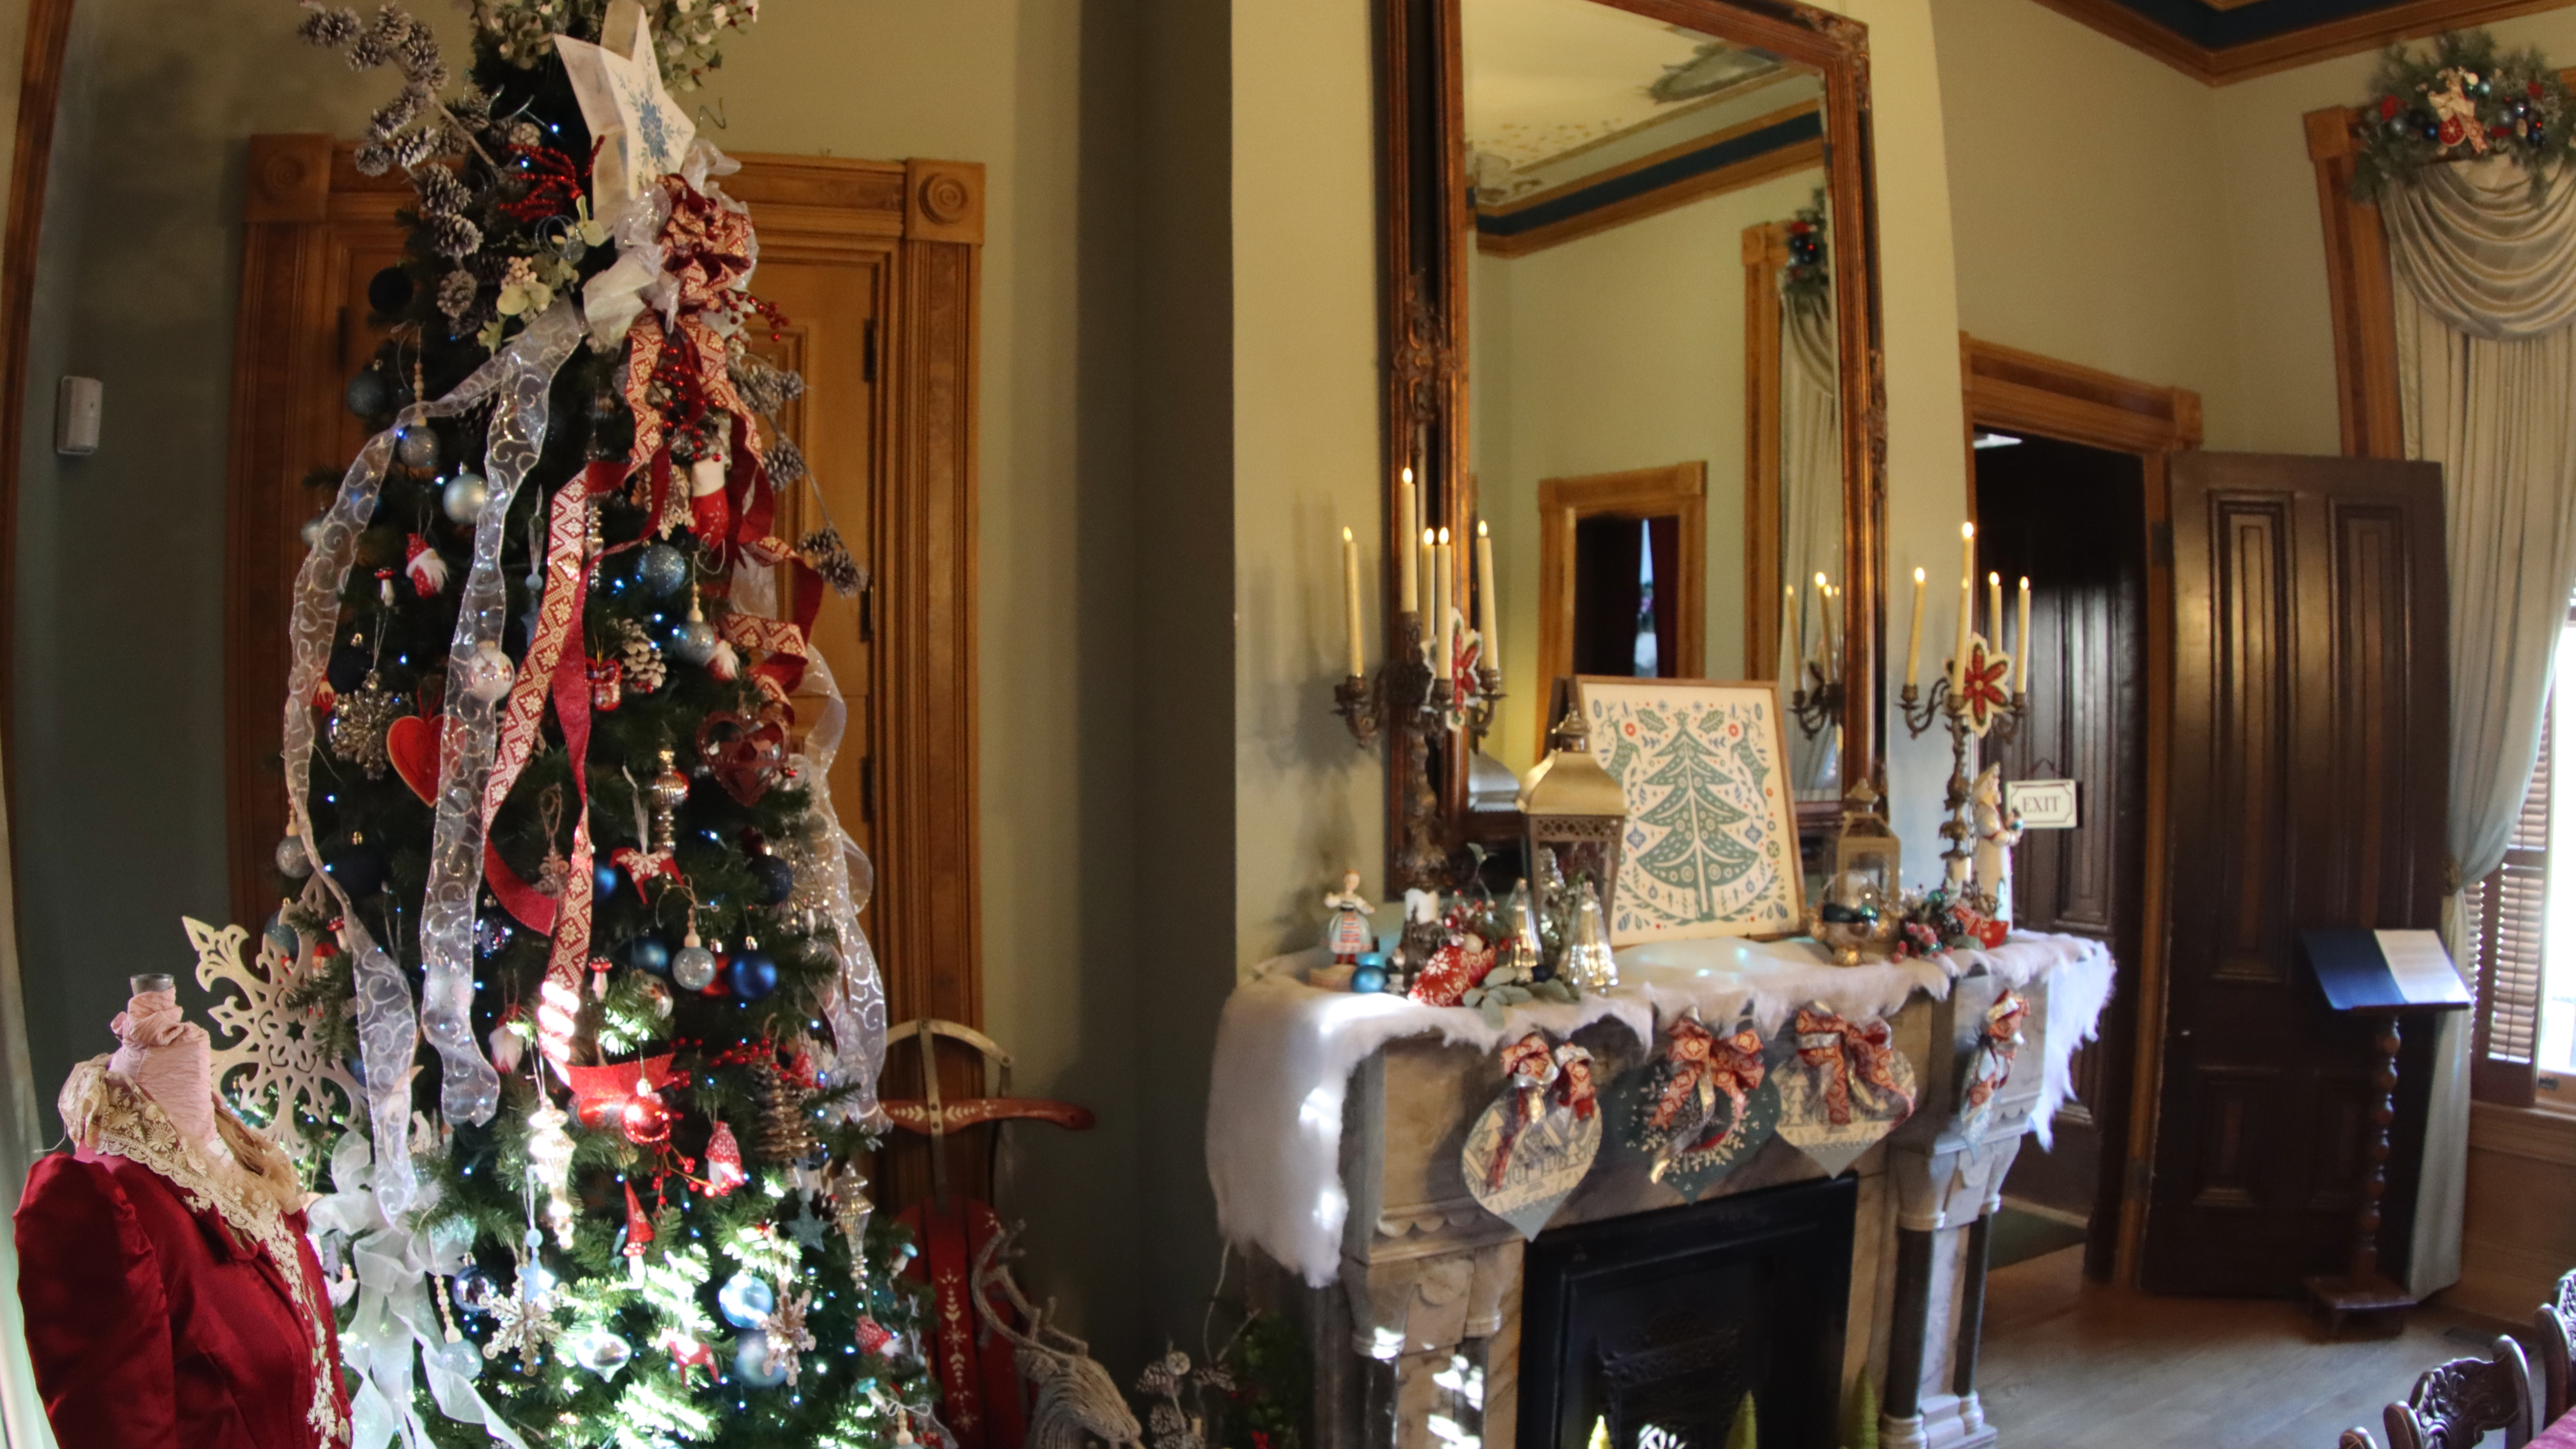 Decorations for the holidays at the Vaile Mansion in Independence. 